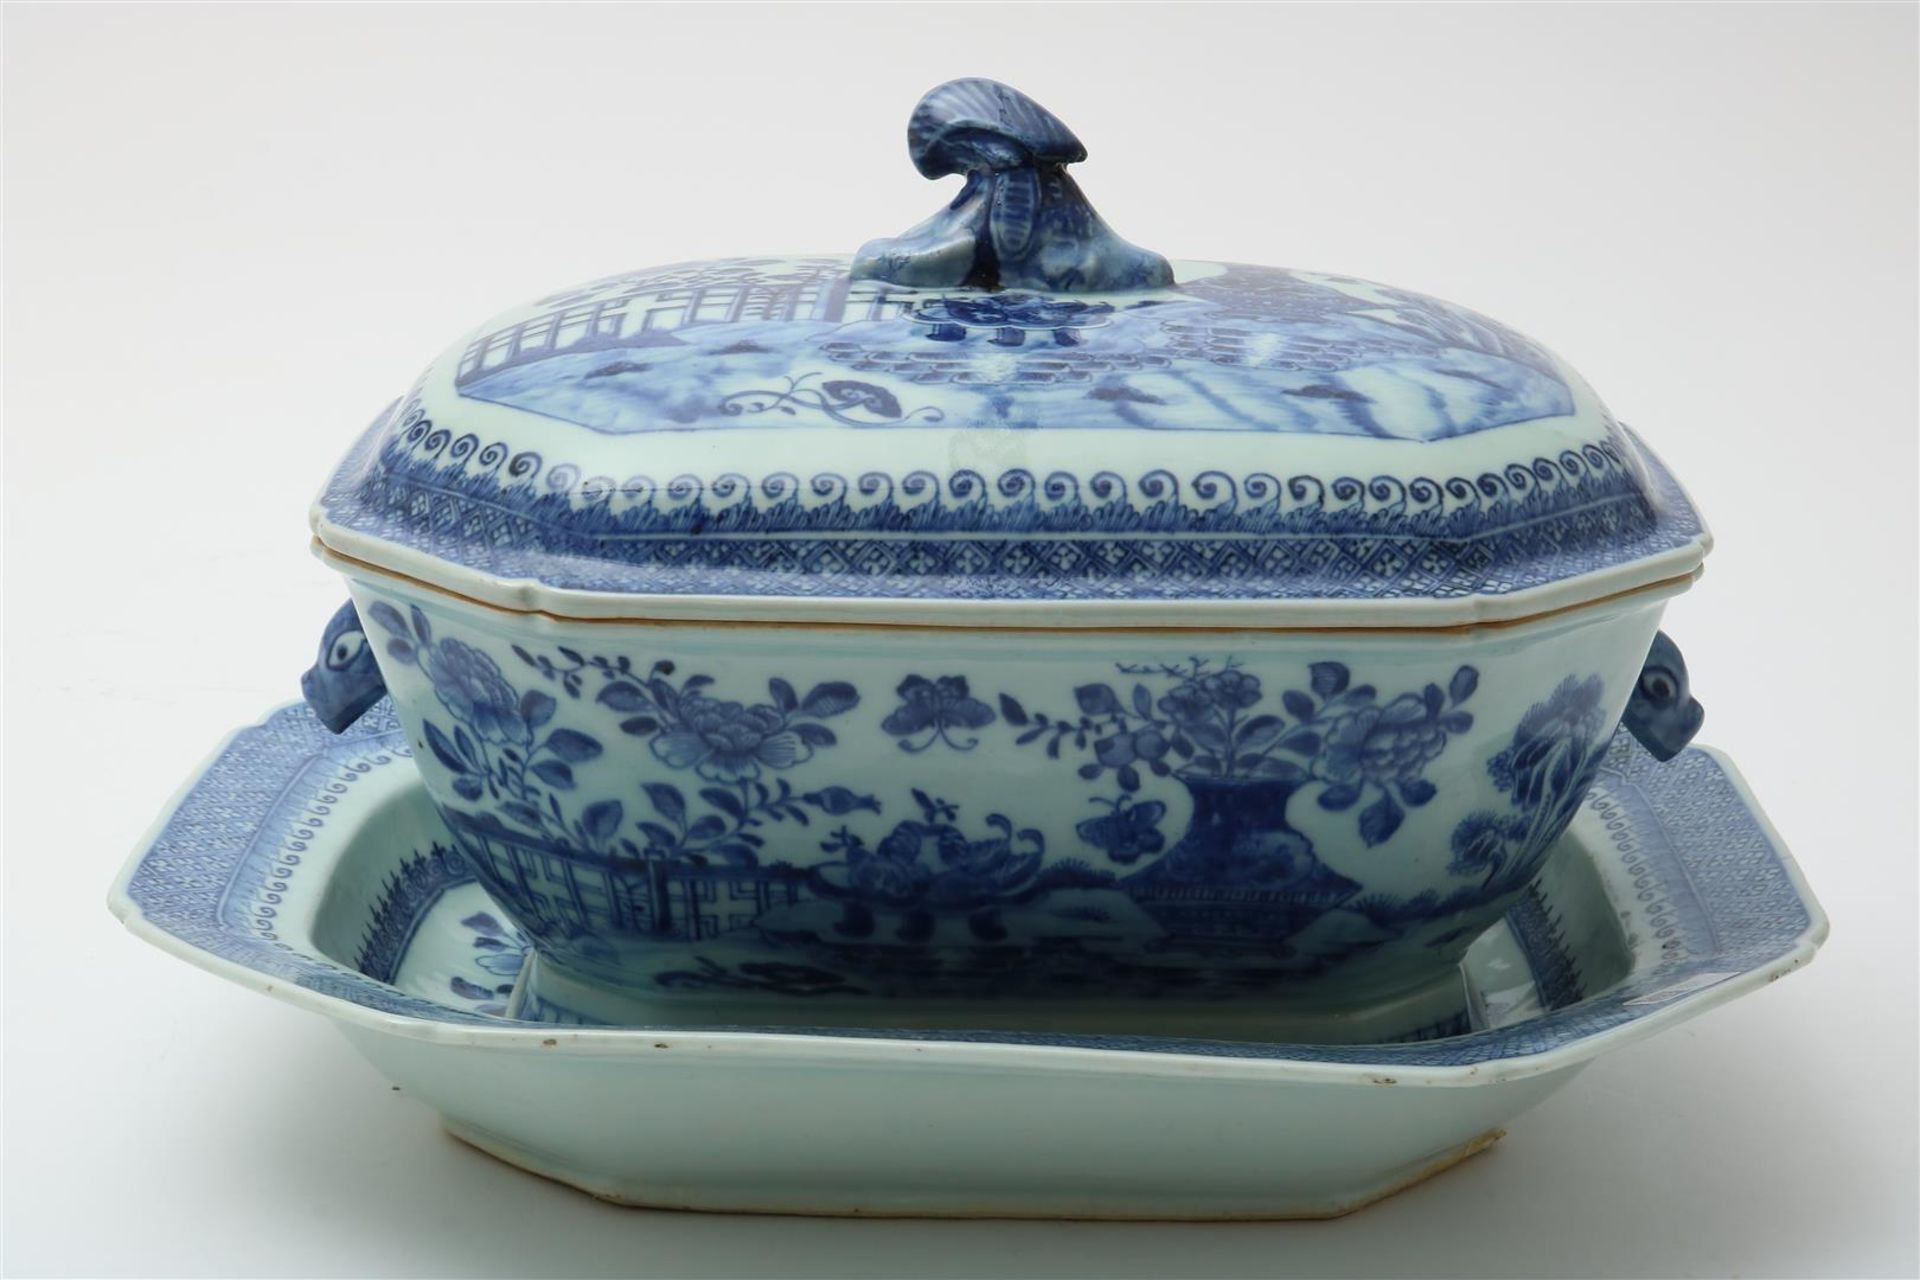 Porcelain Qianlong tureen under cover on a dish decorated with flowers in a landscape, China 18th